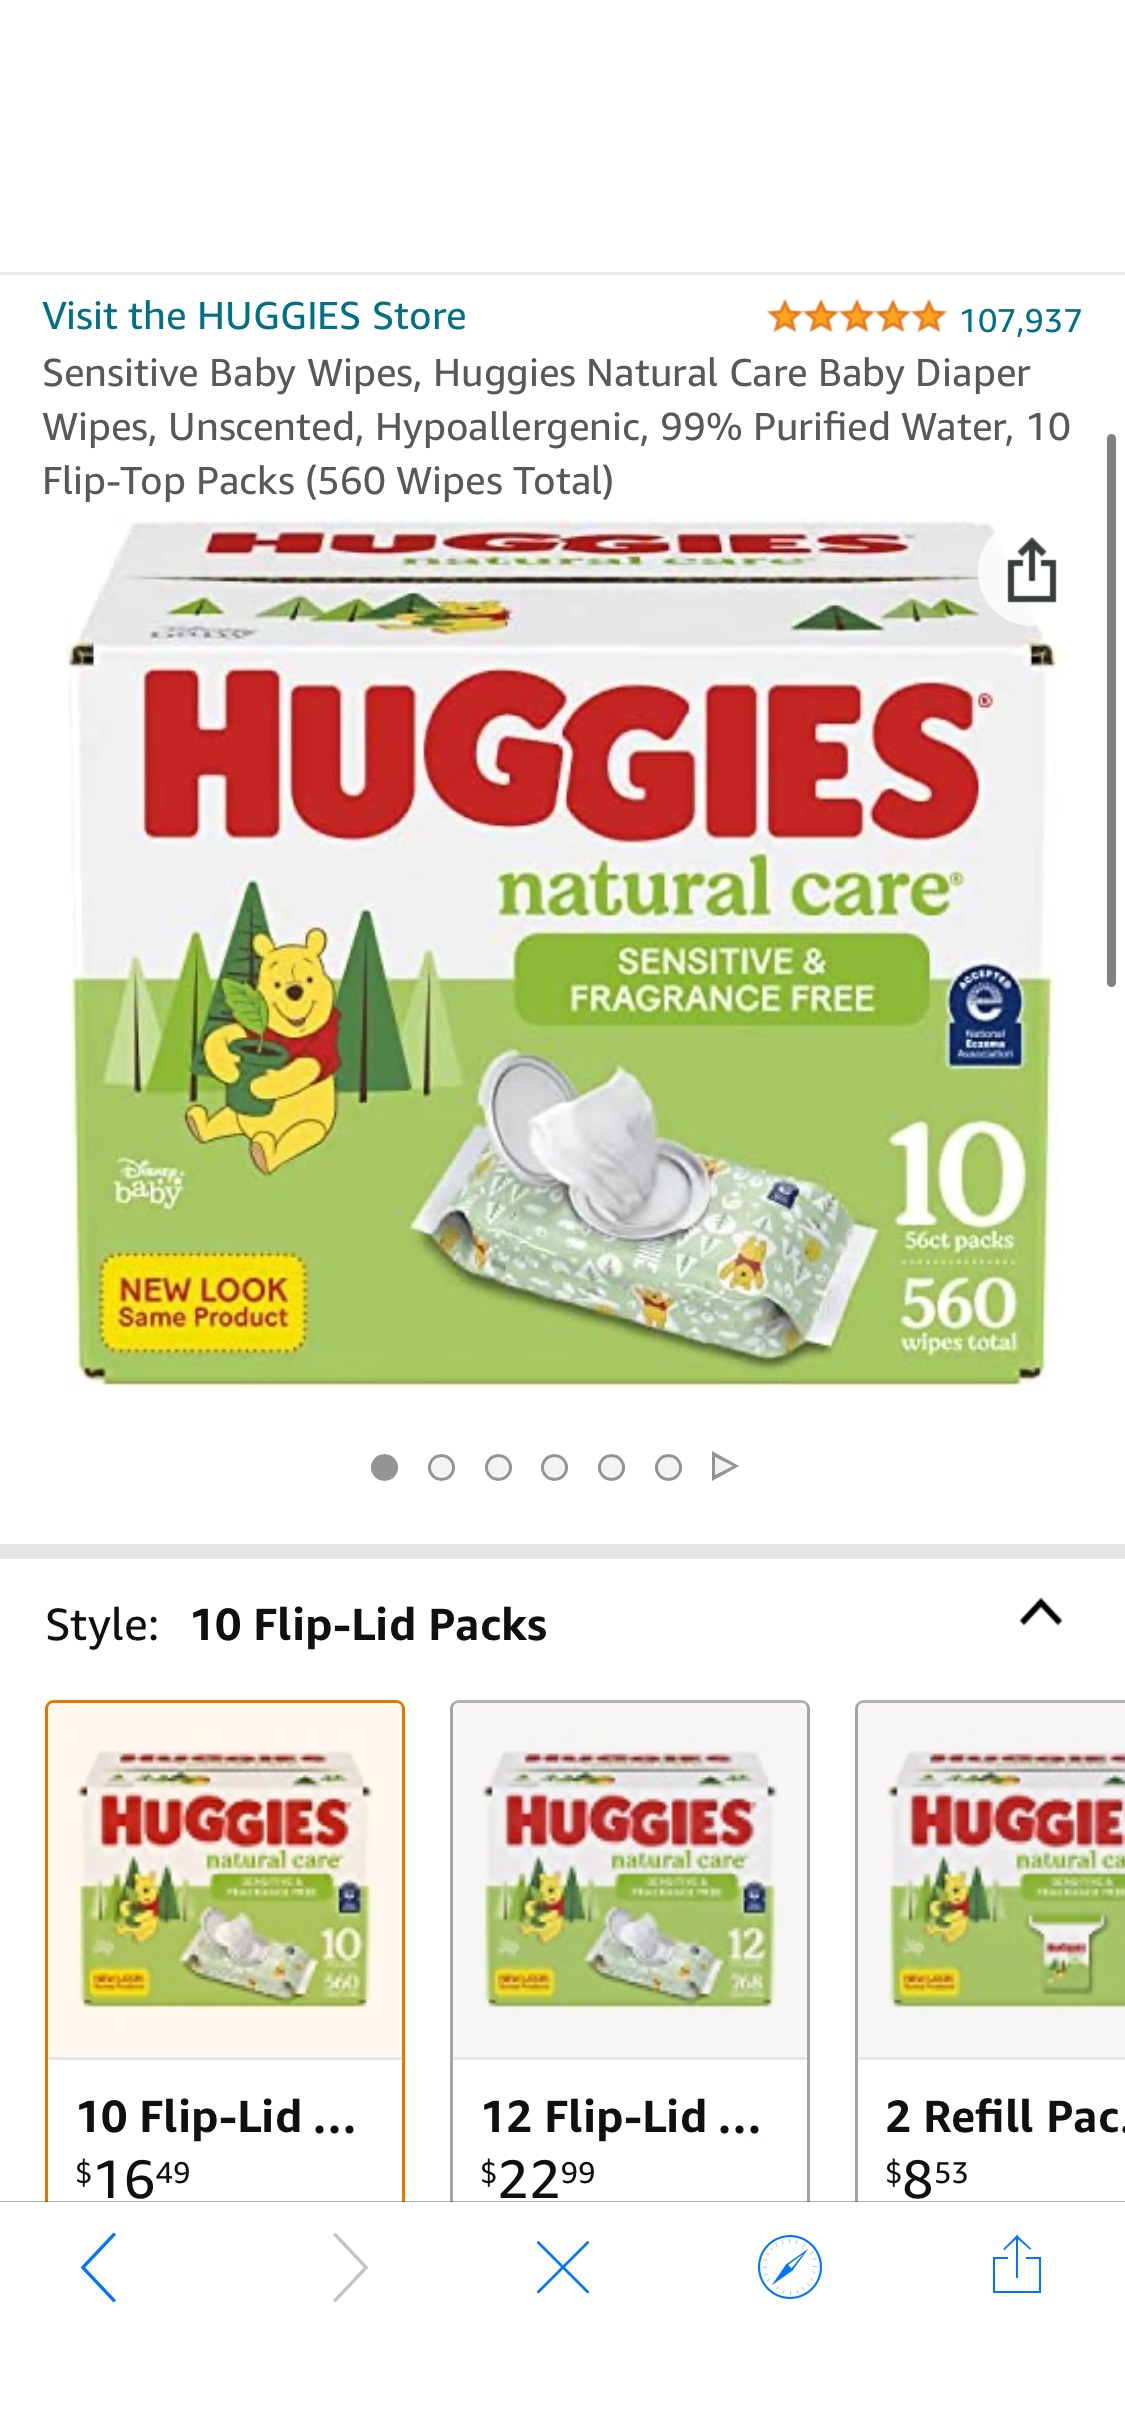 Amazon.com: Sensitive Baby Wipes, Huggies Natural Care Baby Diaper Wipes, Unscented, Hypoallergenic, 99% Purified Water, 10 Flip-Top Packs (560 Wipes Total)宝宝湿巾